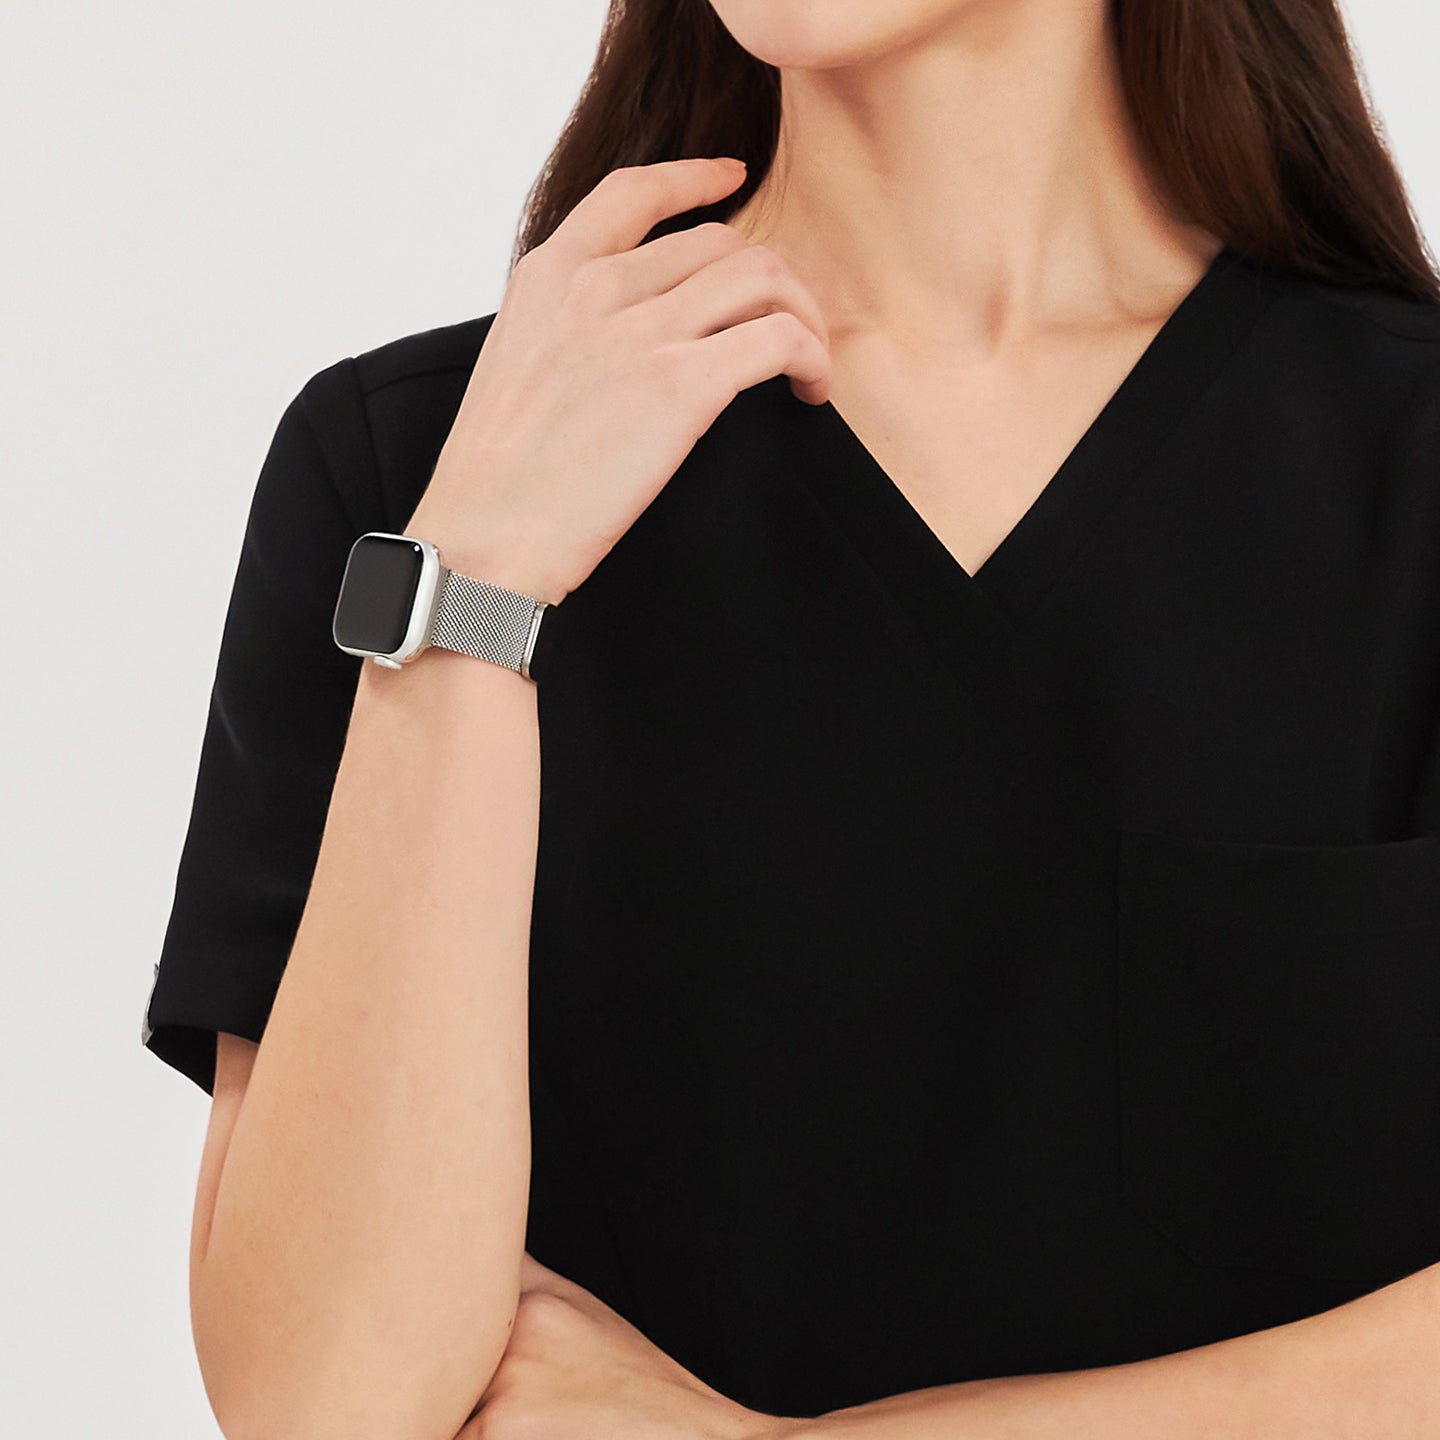 Close-up of a woman wearing a black soft stretch scrub top, showing the V-neck and chest pocket details, with a smartwatch on her wrist,Black